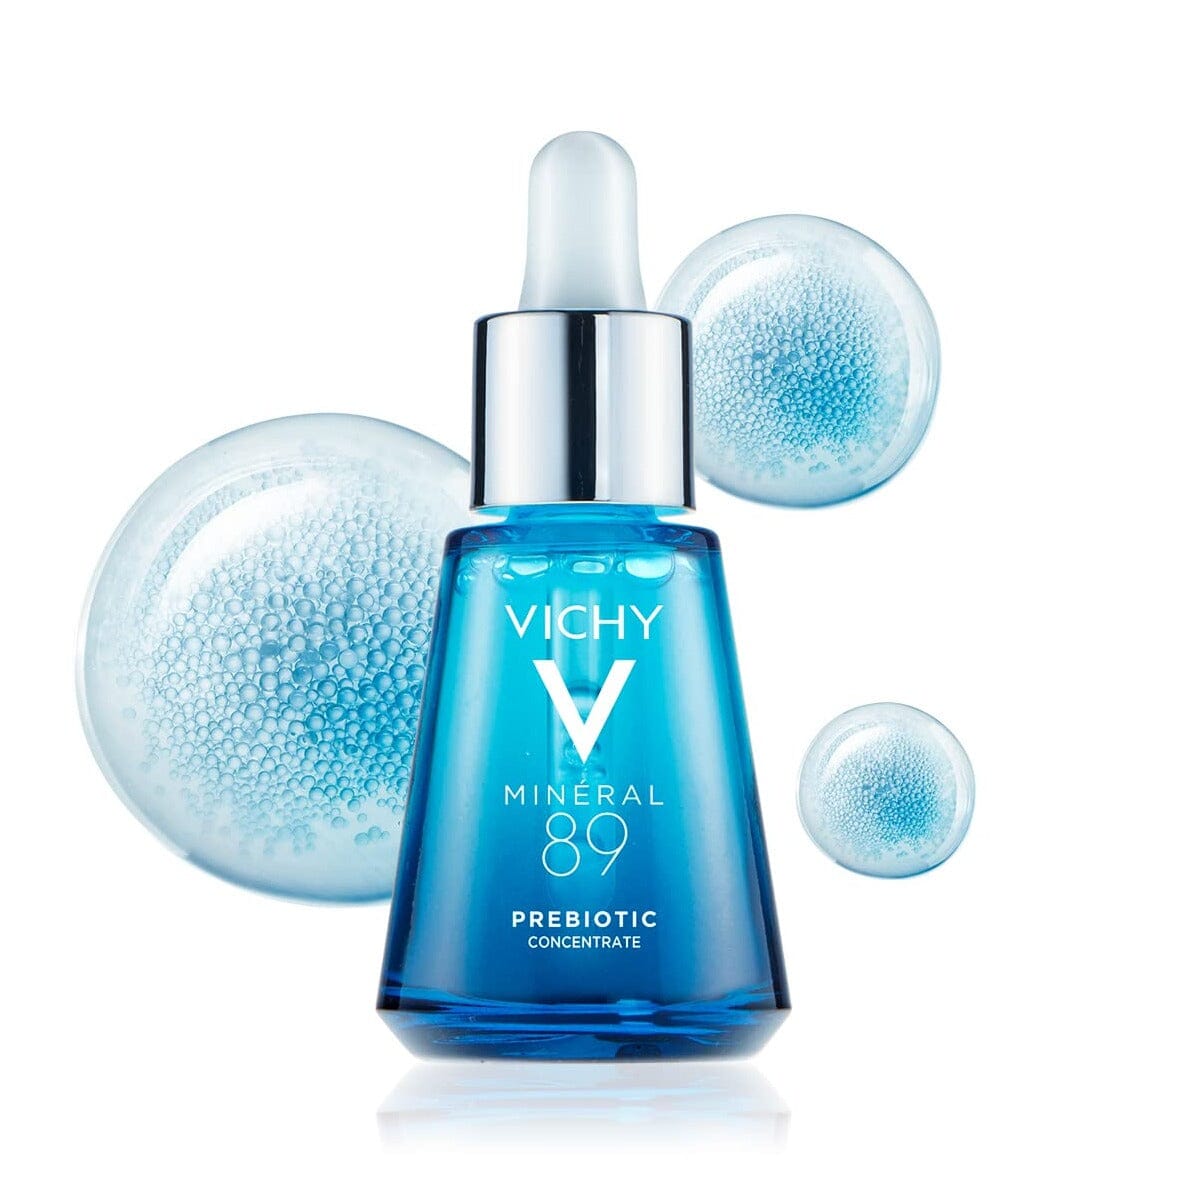 Vichy Mineral 89 Prebiotic Recovery & Defense Concentrate Vichy 30ml Shop at Exclusive Beauty Club